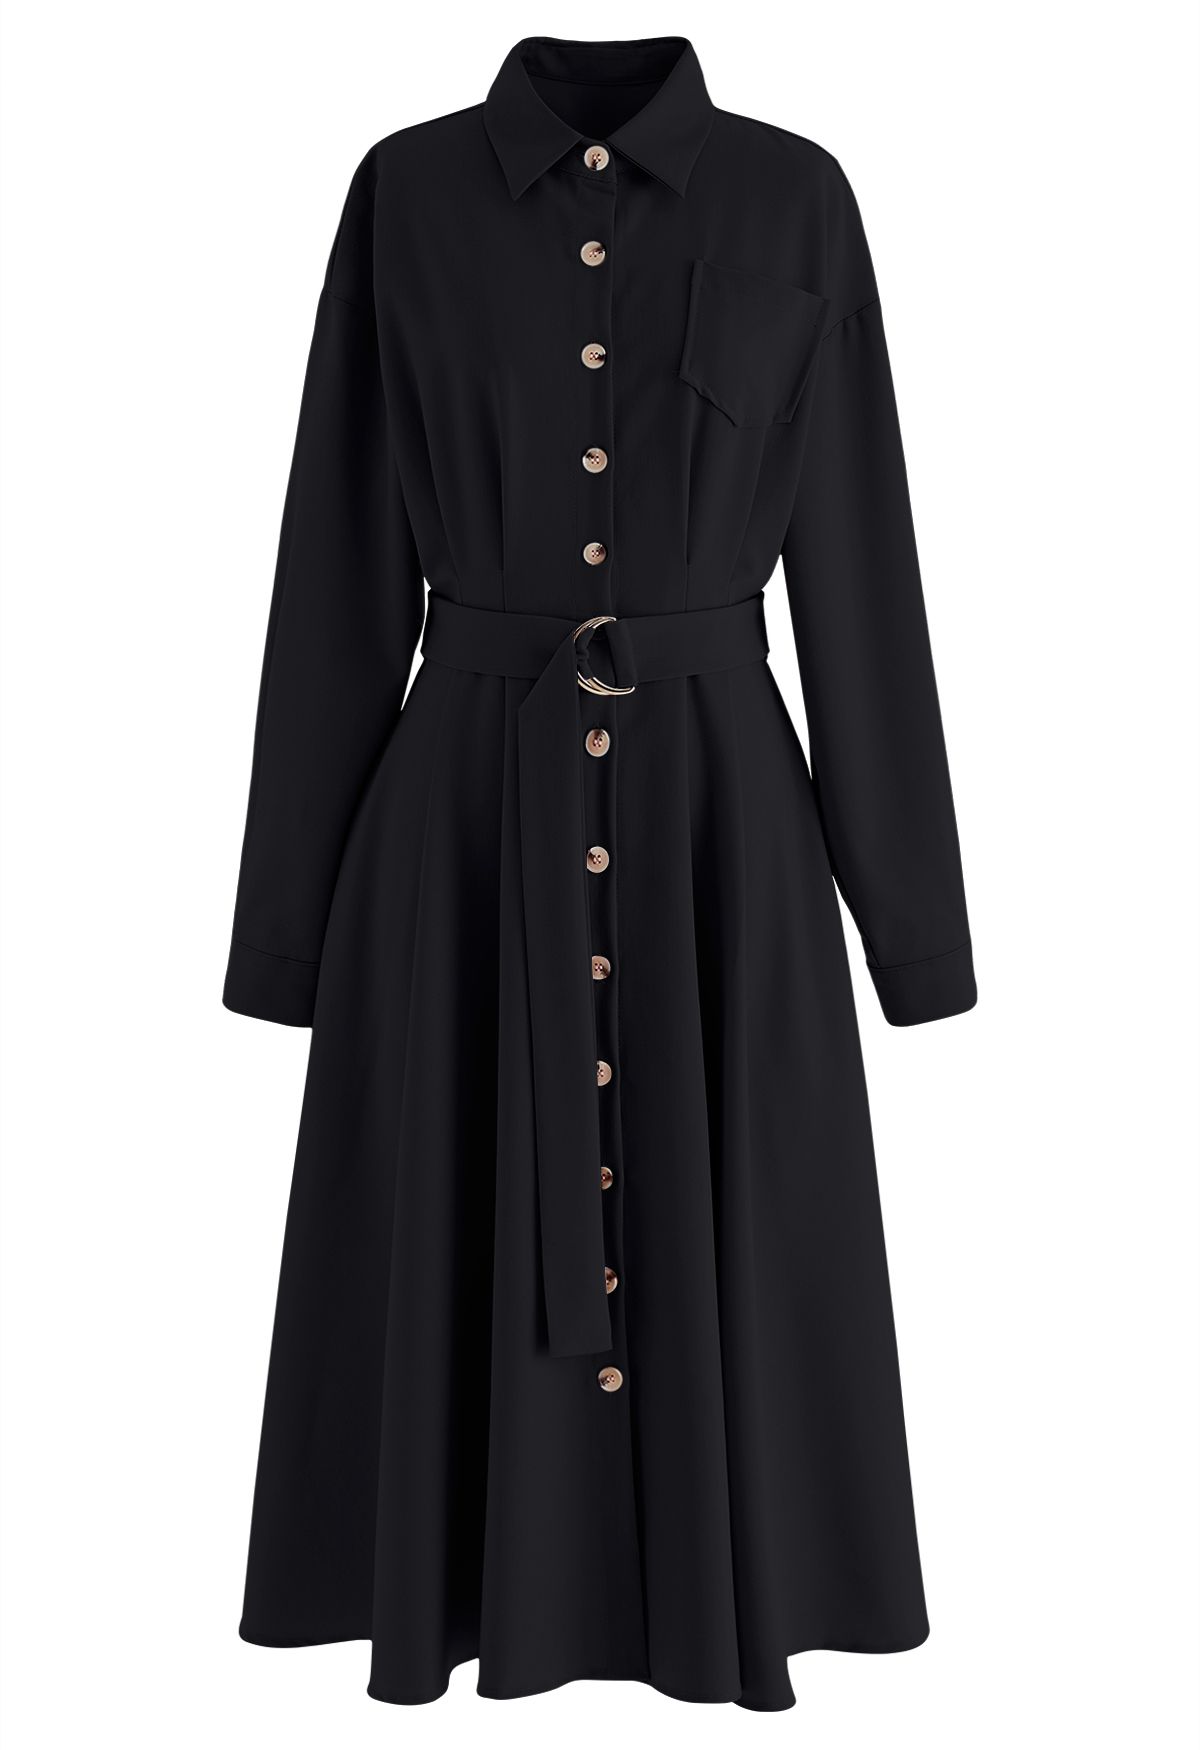 Belted Button Down Shirt Dress in Black